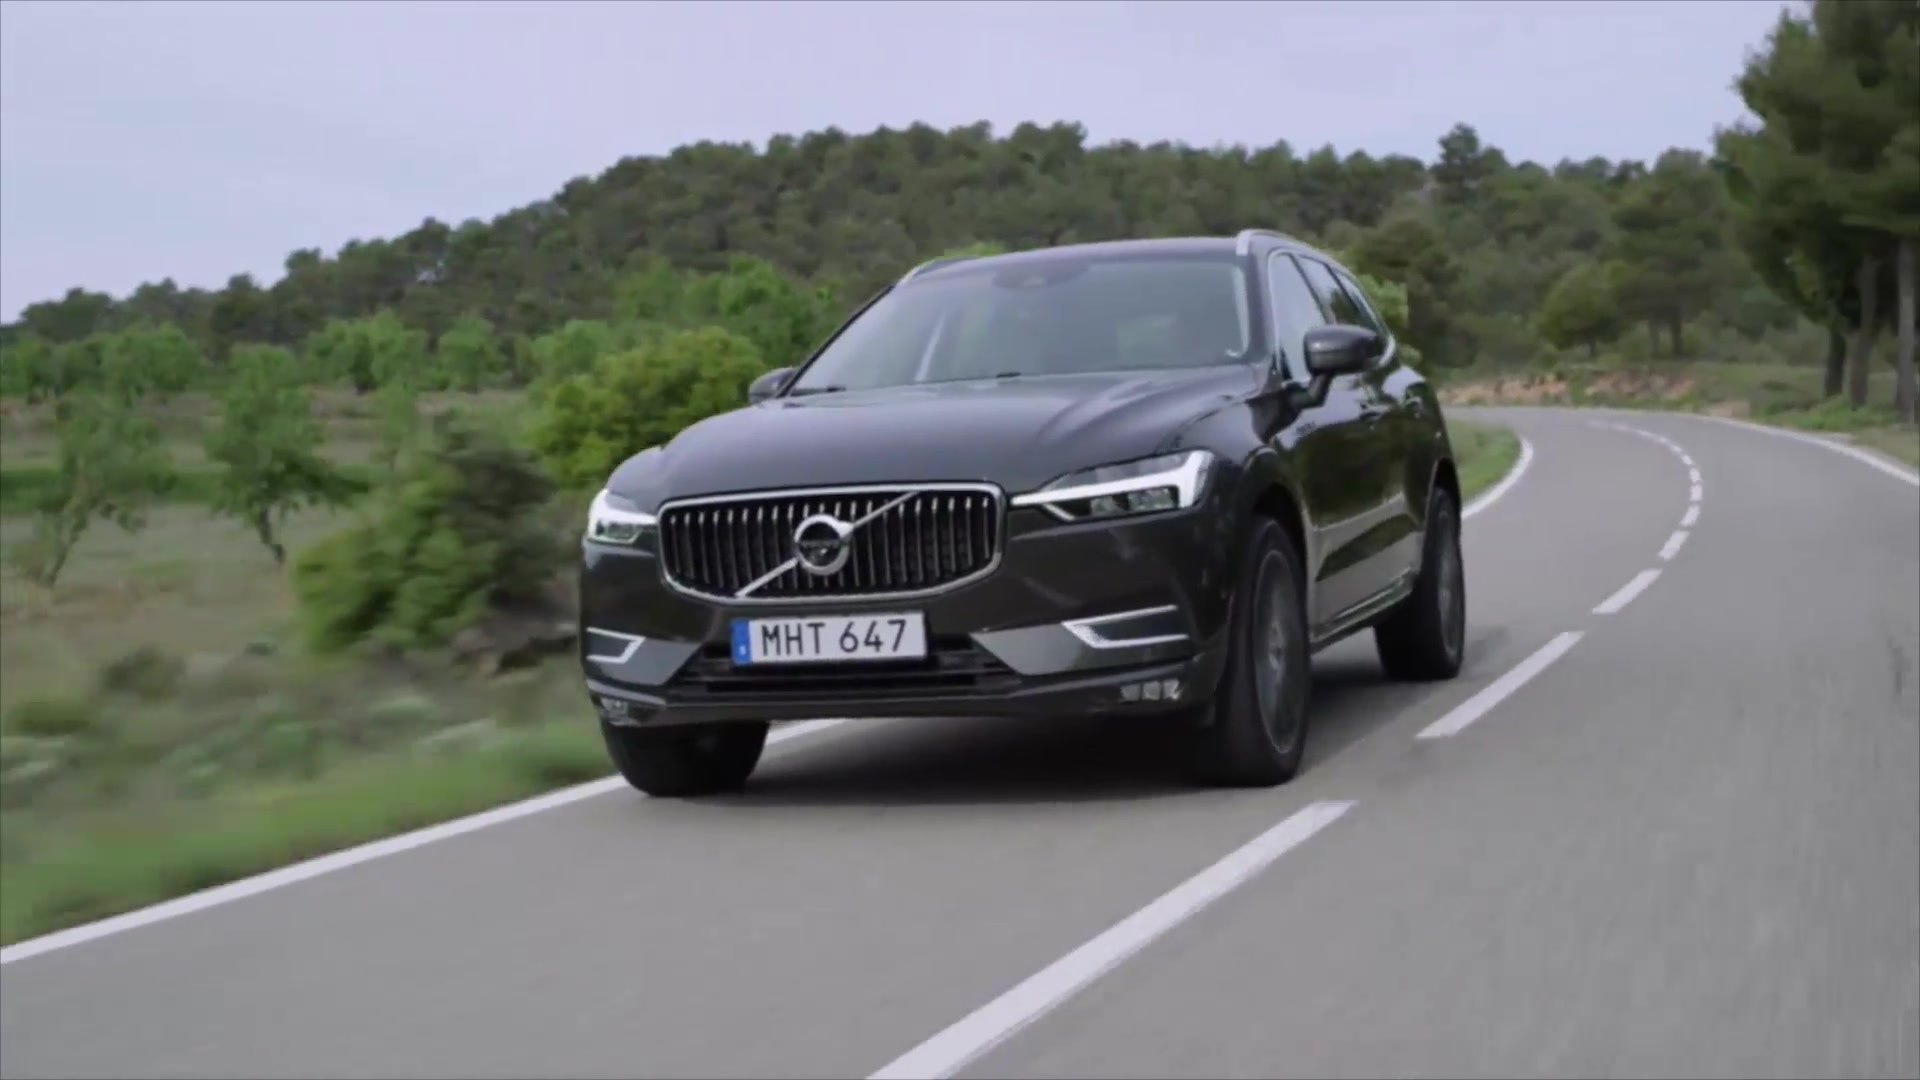 The new Volvo XC60 D5 in Pine Grey Driving Video - video Dailymotion